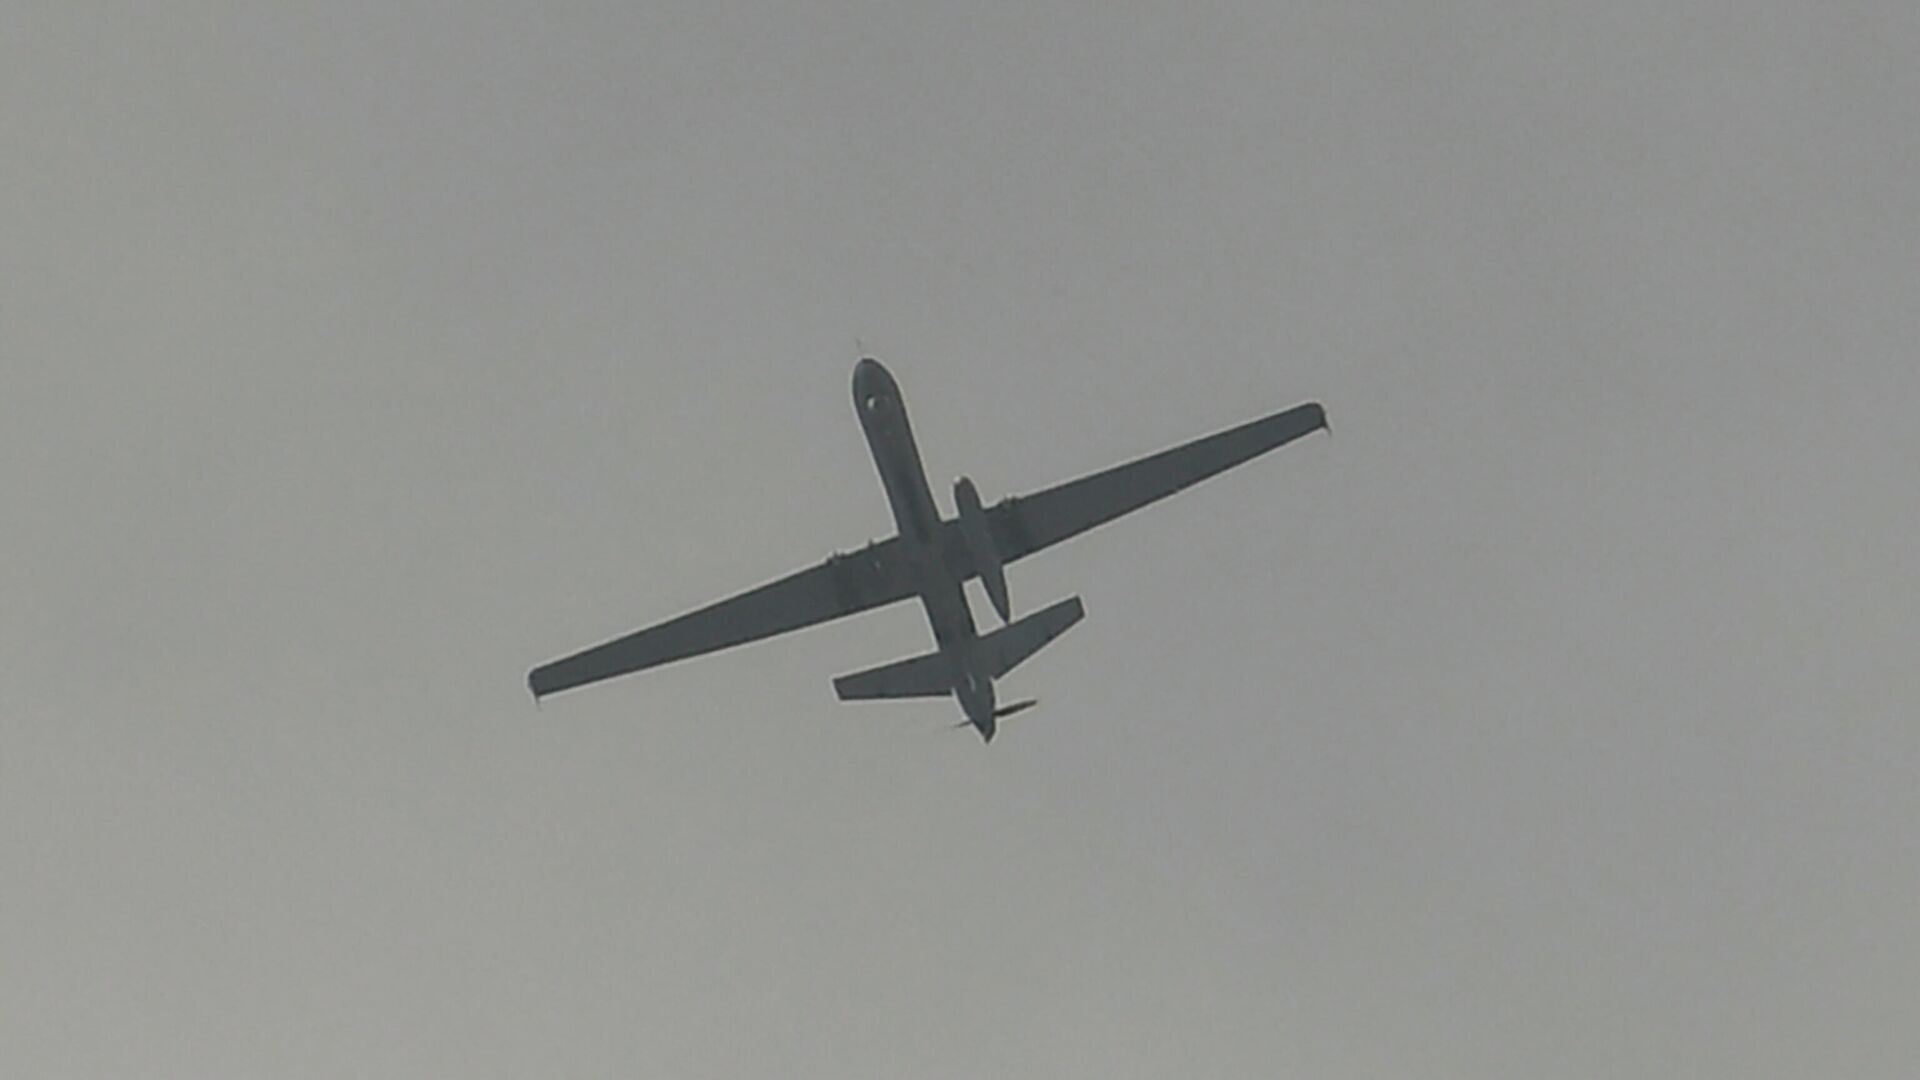 A drone flies over the airport in Kabul on August 31, 2021. - The US military announced it has completed its withdrawal from Afghanistan after a brutal 20-year war -- one that started and ended with the hardline Islamist Taliban in power, despite billions of dollars spent trying to rebuild the conflict-wracked country. - Sputnik International, 1920, 10.09.2021